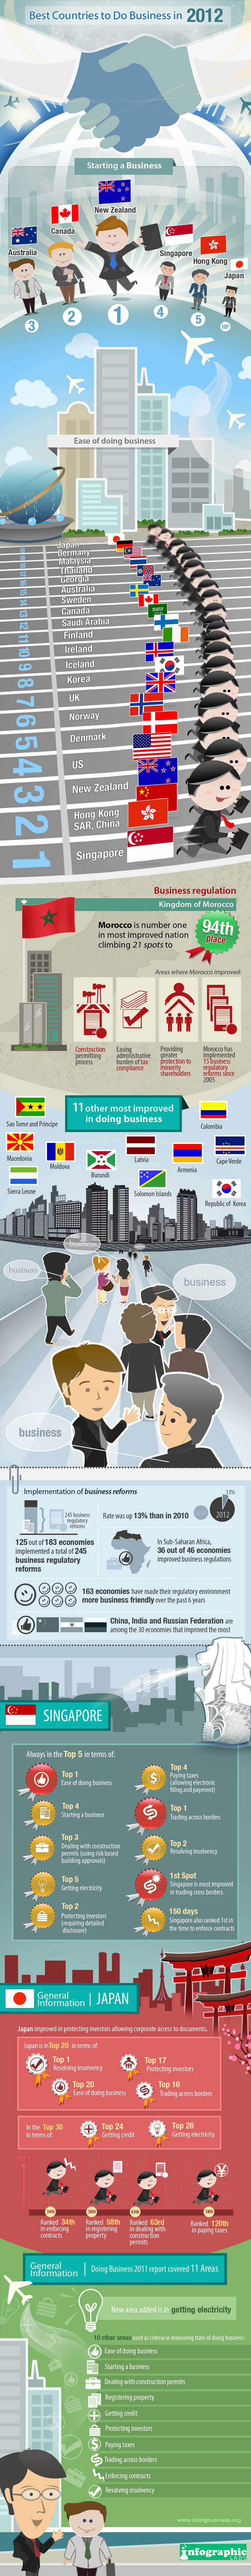 best-business-countries-infographic